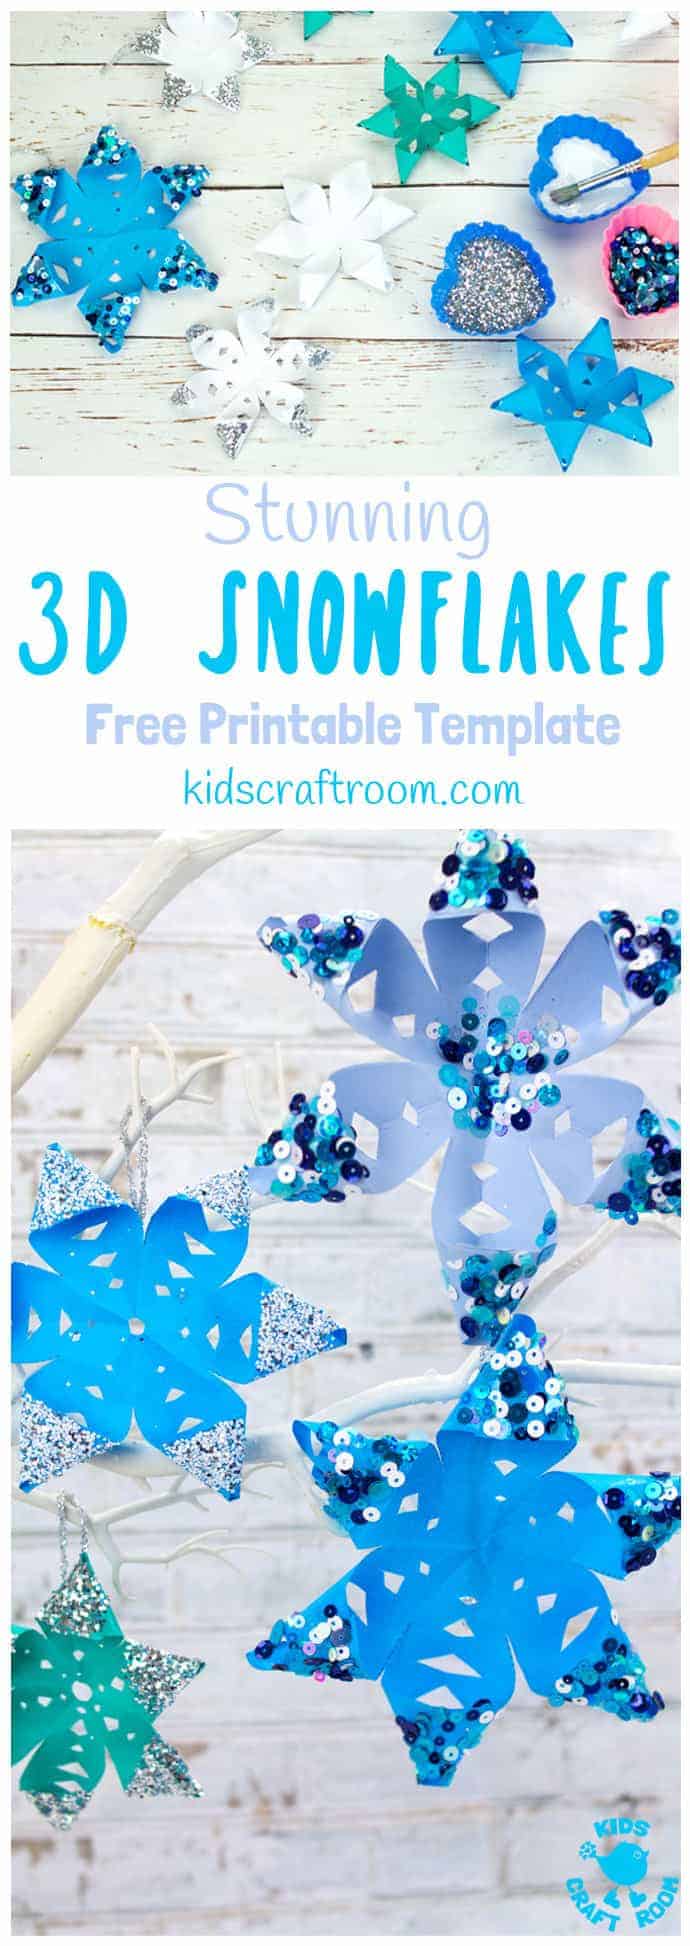 STUNNING 3D SNOWFLAKE CRAFT - perfect for hanging on the Christmas tree or for Winter themed fun! A Winter craft with a difference! ( free printable template) #snowflakes #christmas #ornaments #christmascrafts #wintercrafts #winteractivities #snow #kidscrafts #kidscraftroom